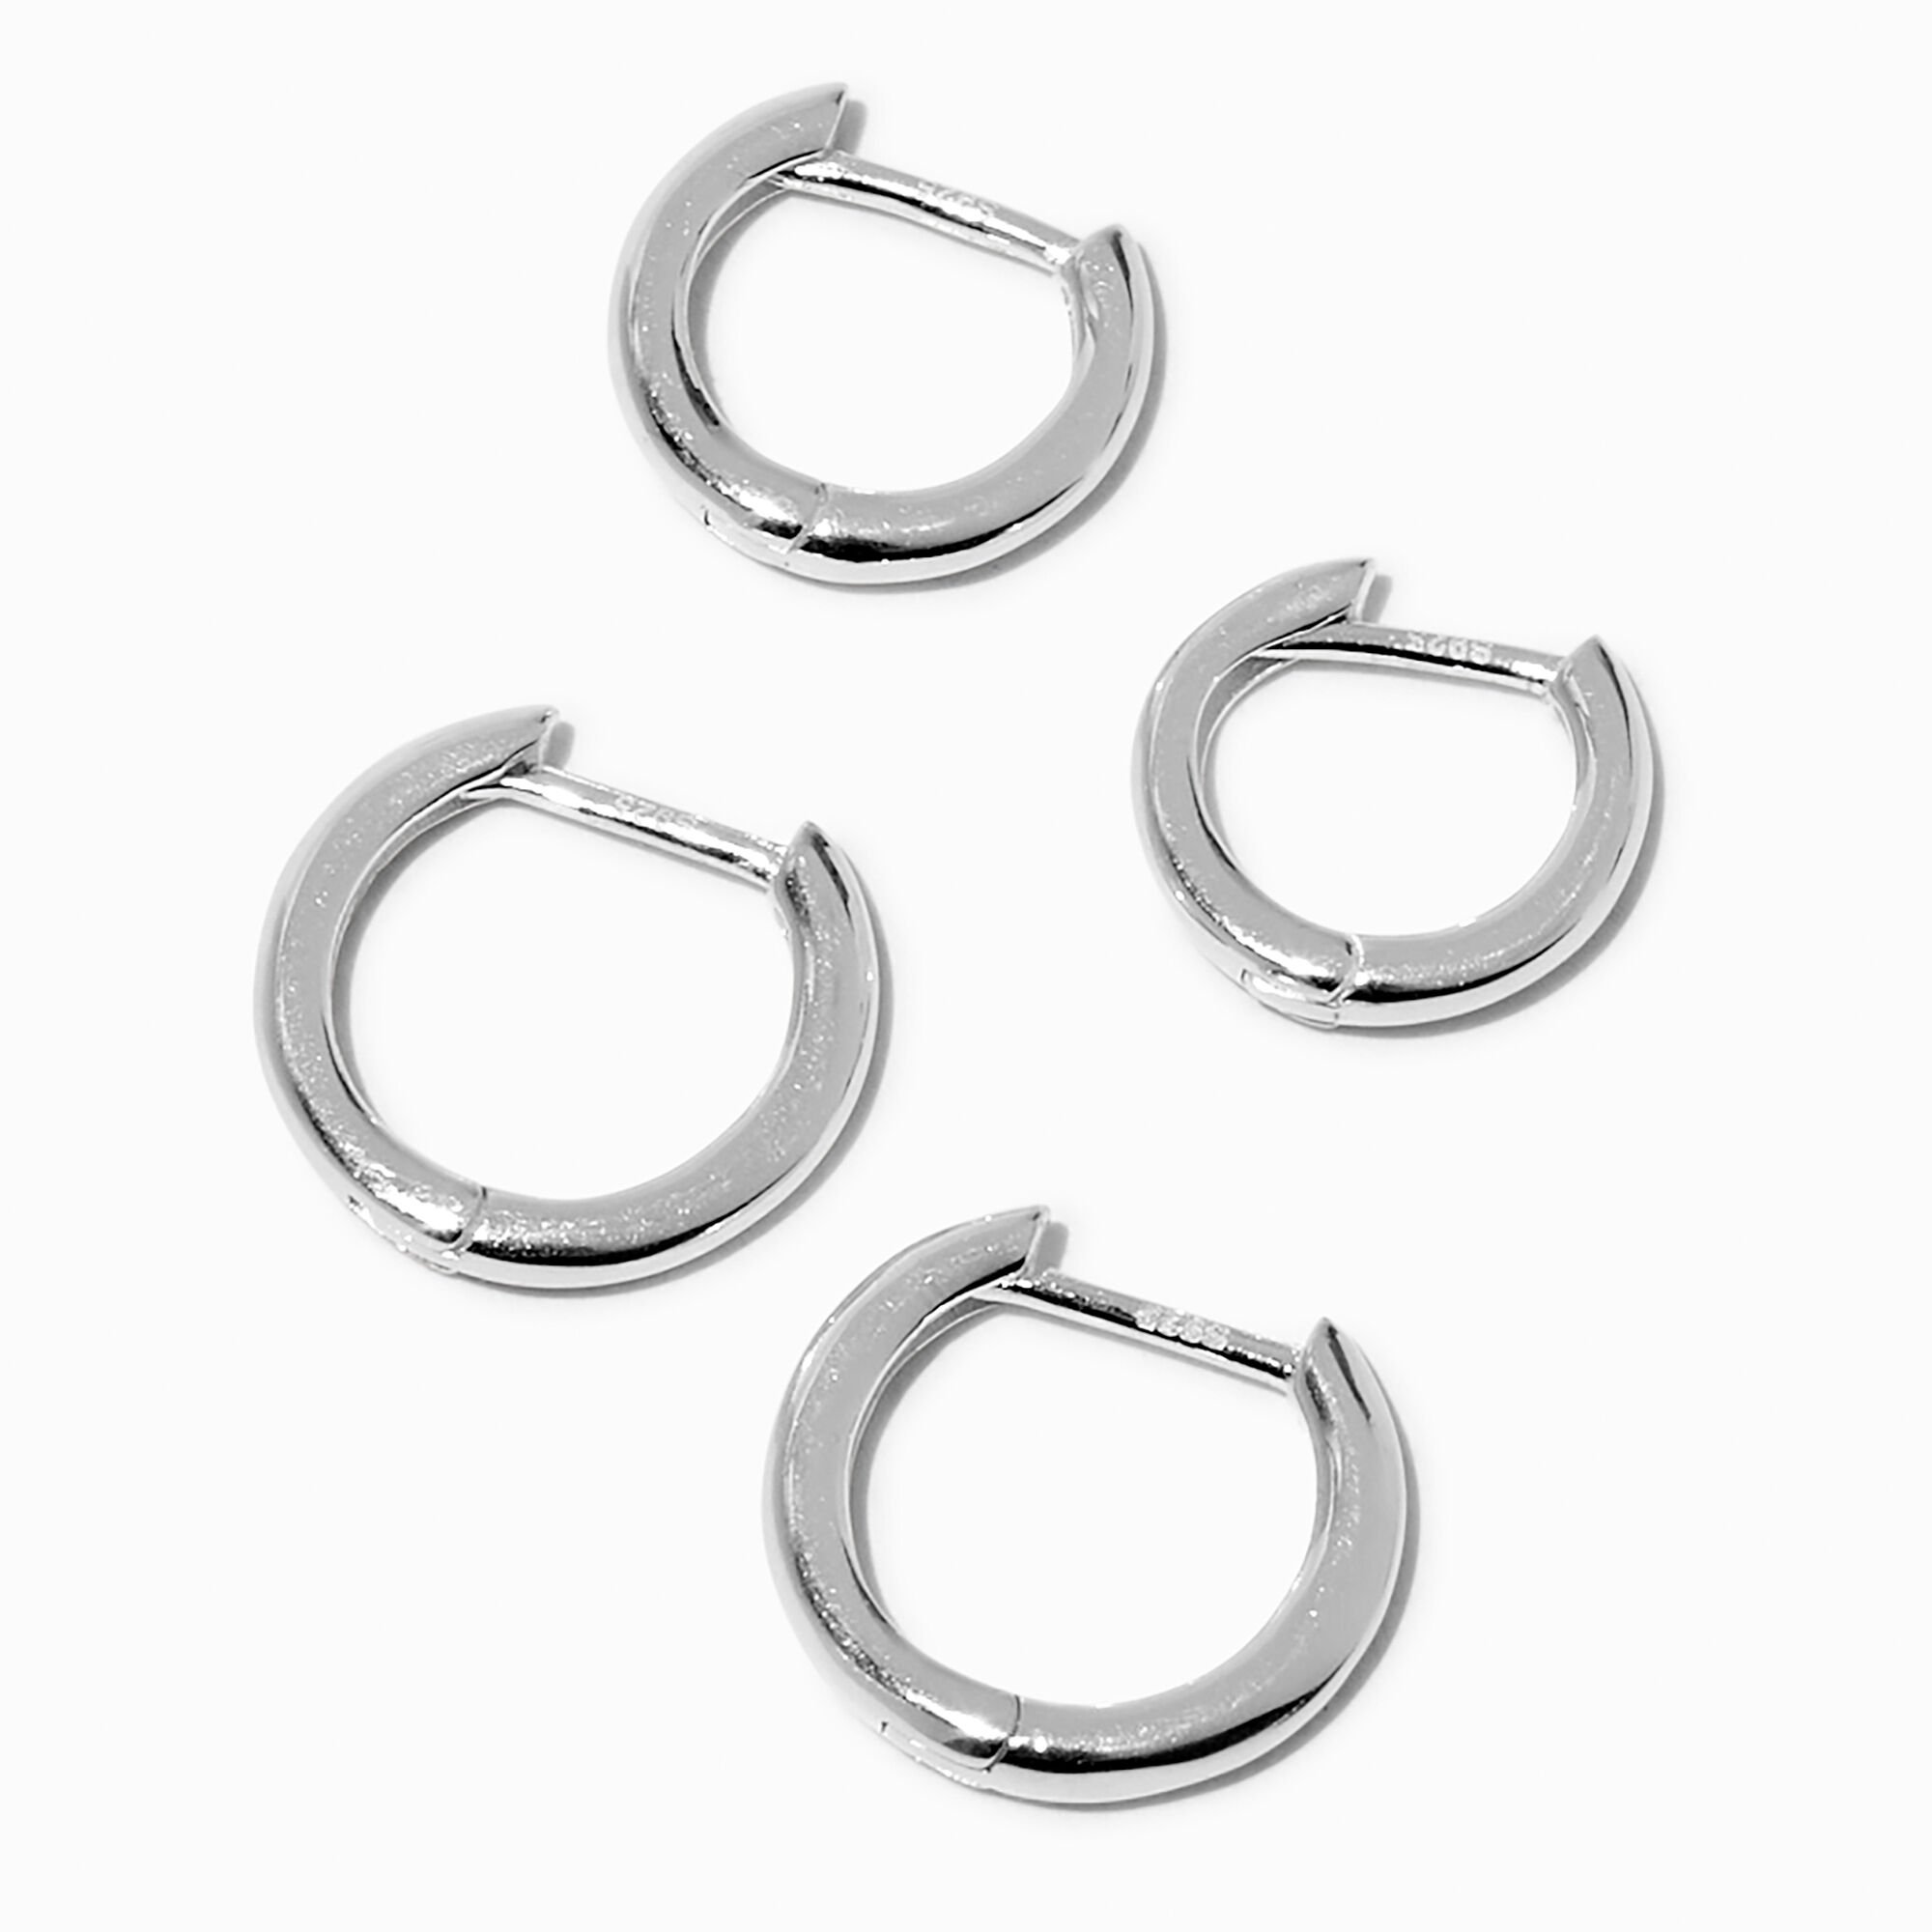 View C Luxe By Claires 12MM 14MM Clicker Hoop Earrings 2 Pack Silver information